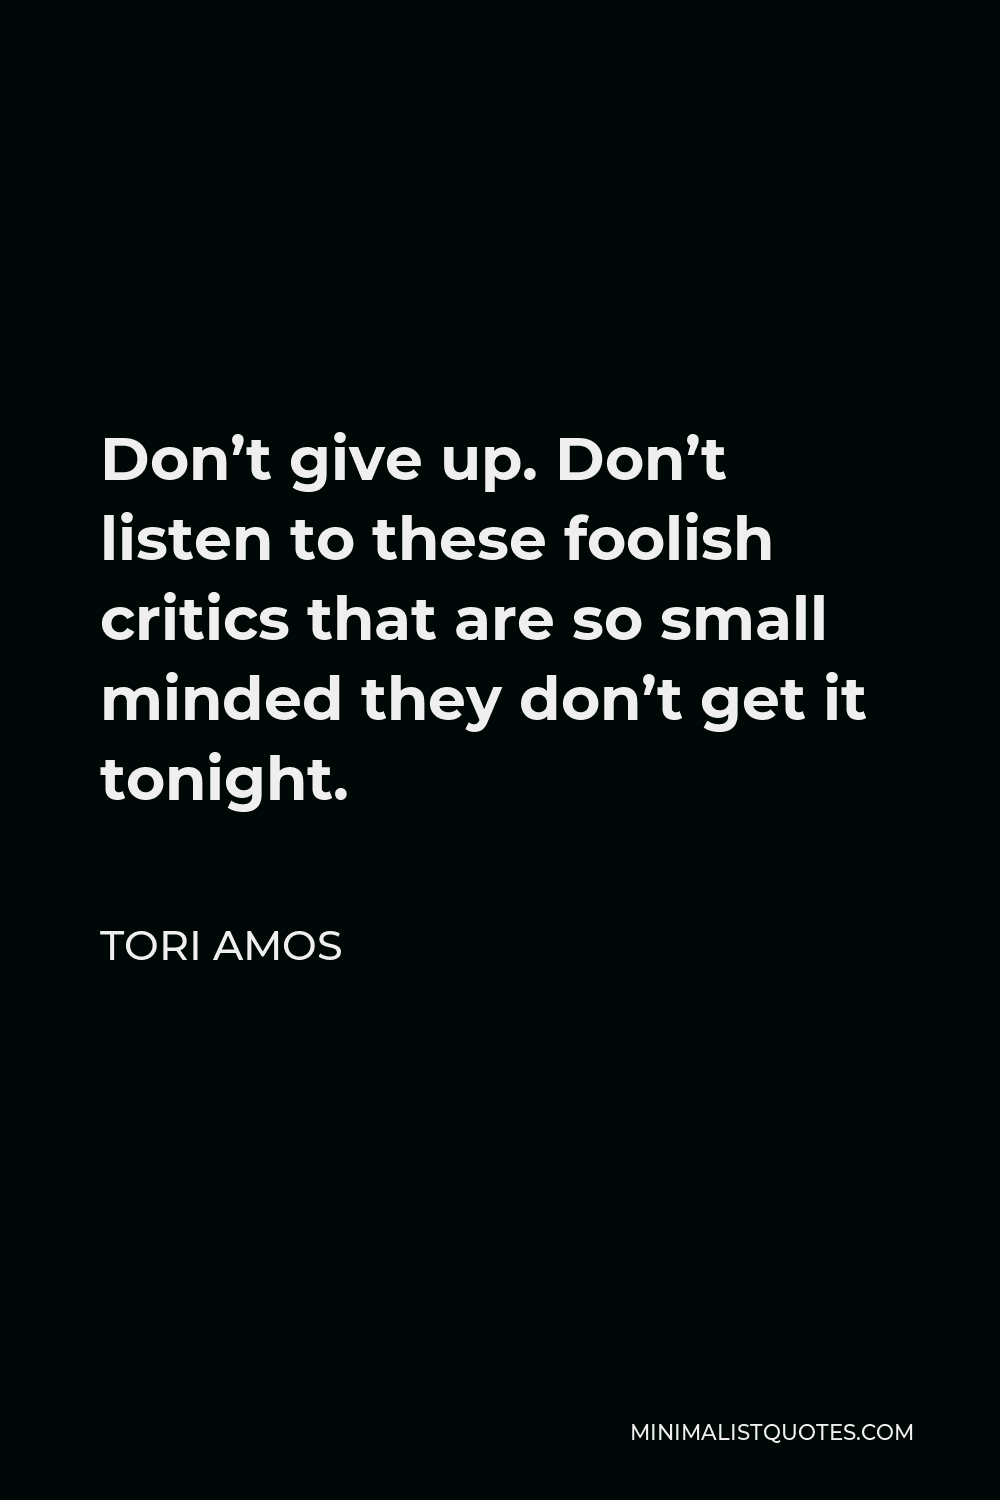 Tori Amos Quote - Don’t give up. Don’t listen to these foolish critics that are so small minded they don’t get it tonight.